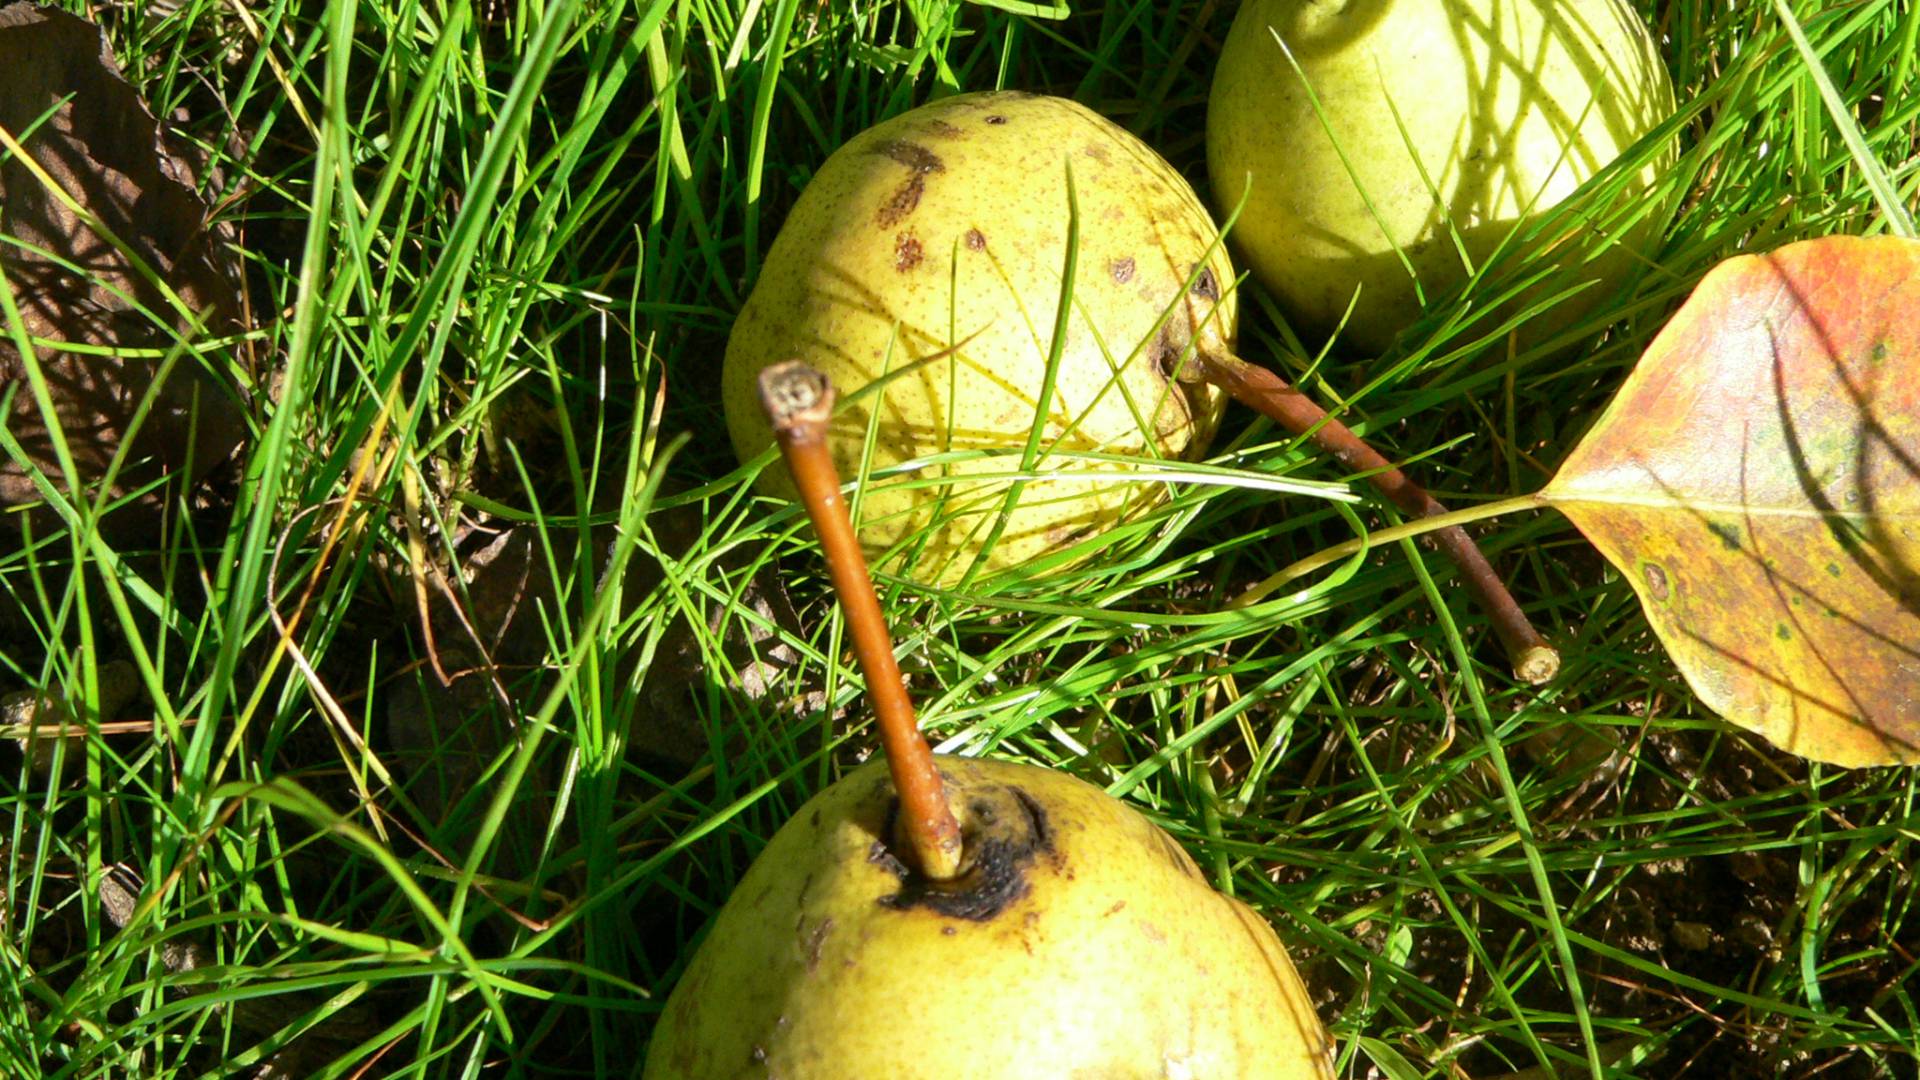 pears laying in the grass